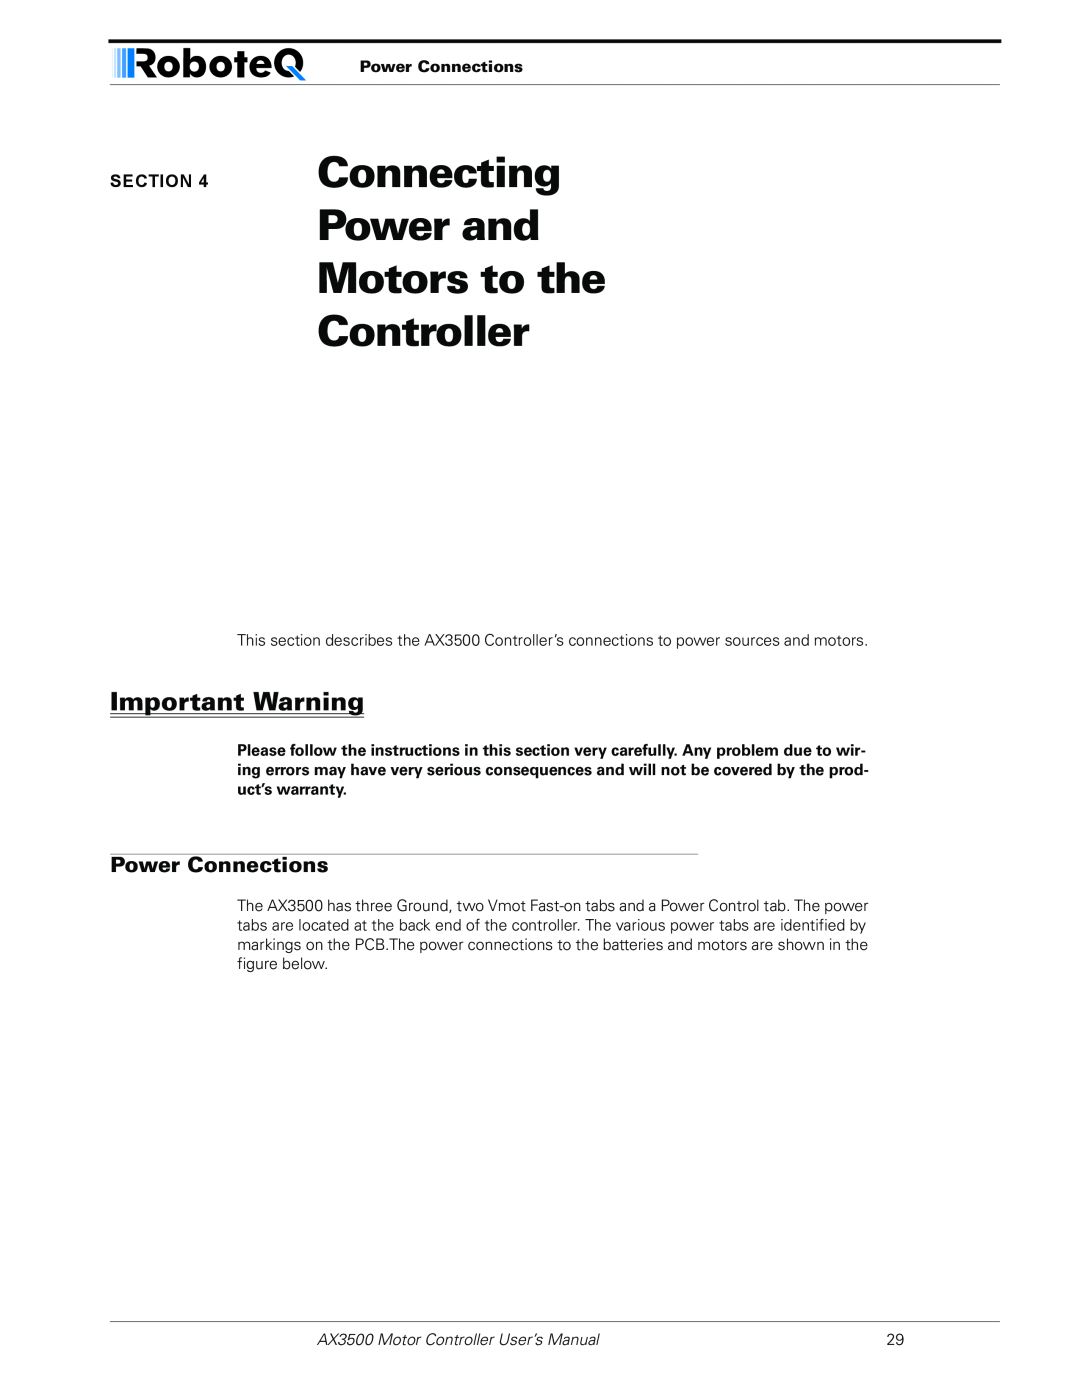 RoboteQ AX3500 user manual Connecting Power and Motors to the Controller, Power Connections, Important Warning 